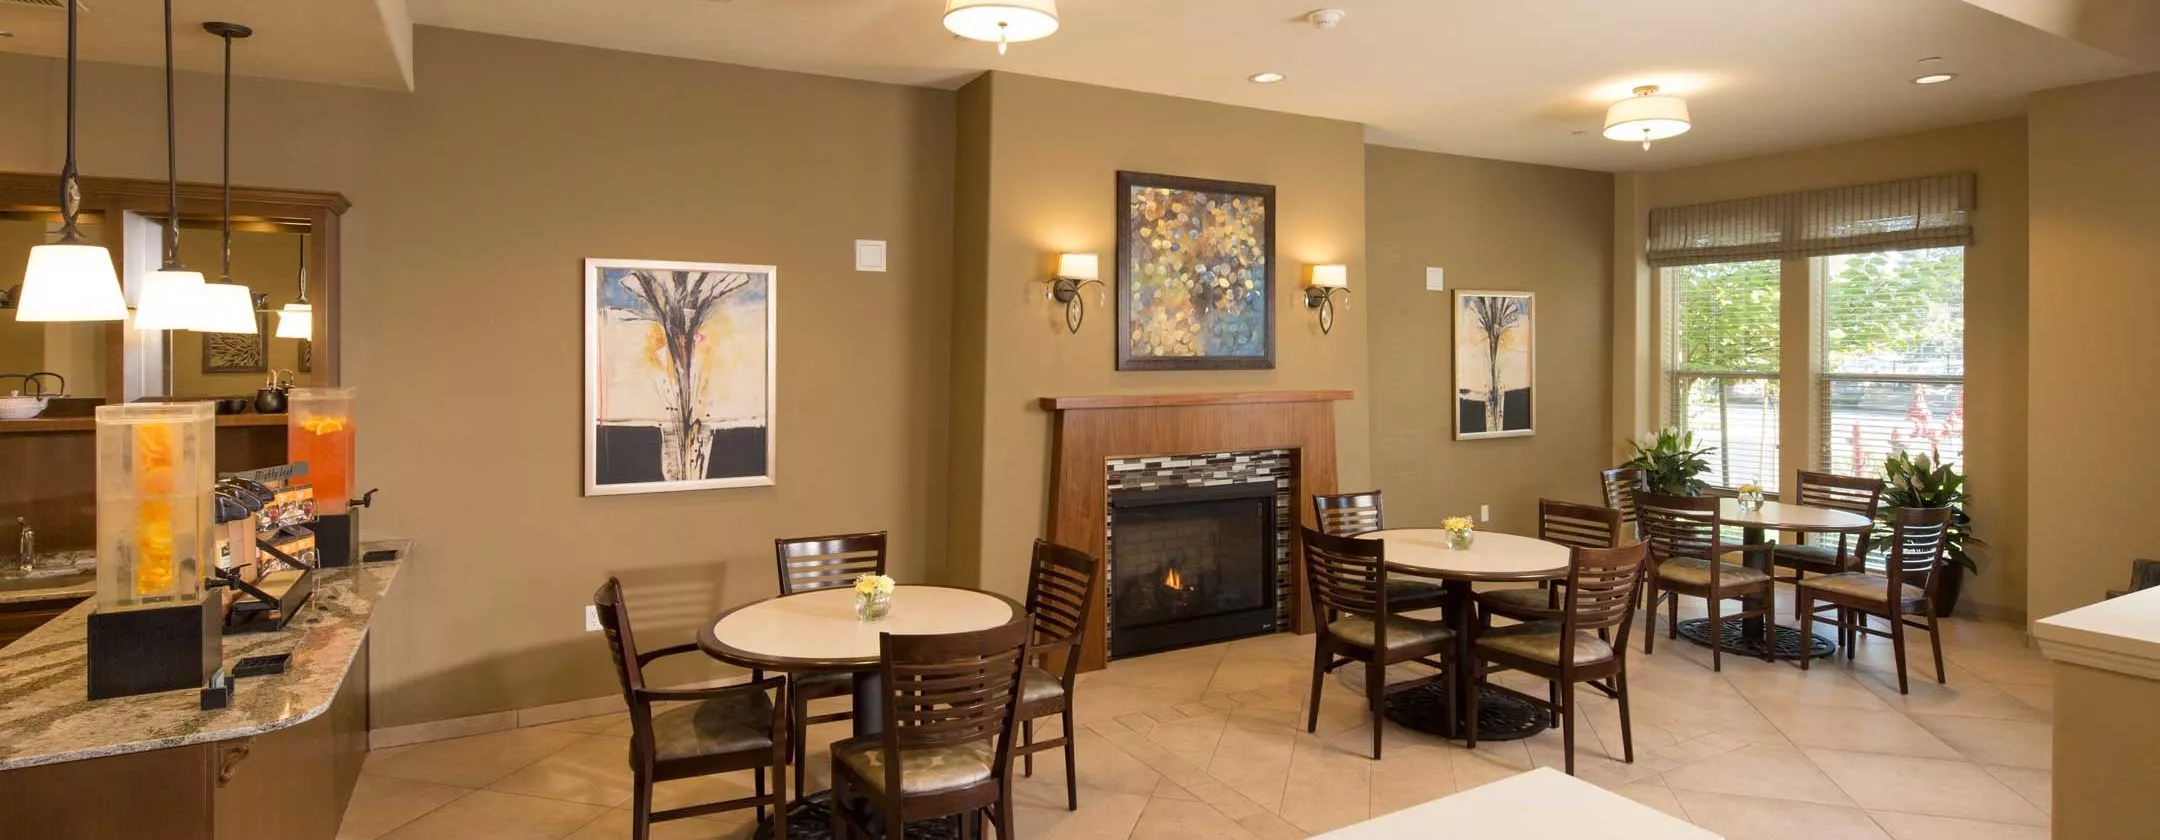 San Jose bistro with seating area and fire place